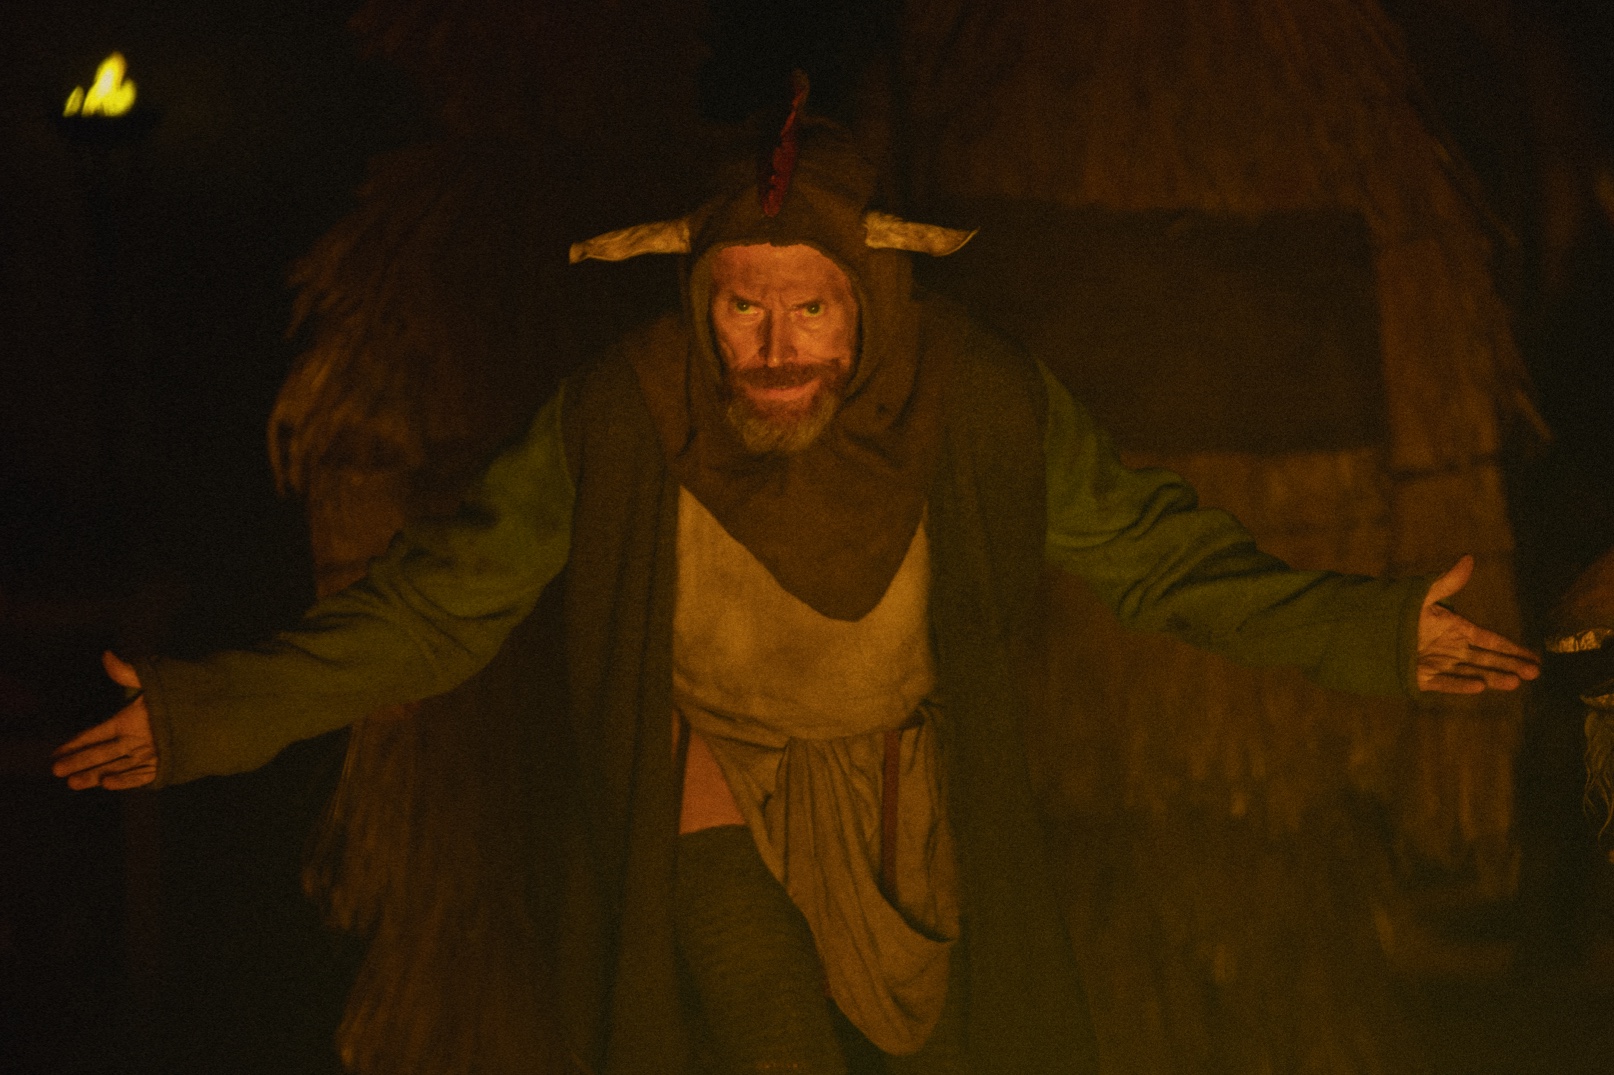 Willem Dafoe as Heimir the Fool (image courtesy of Focus Features)